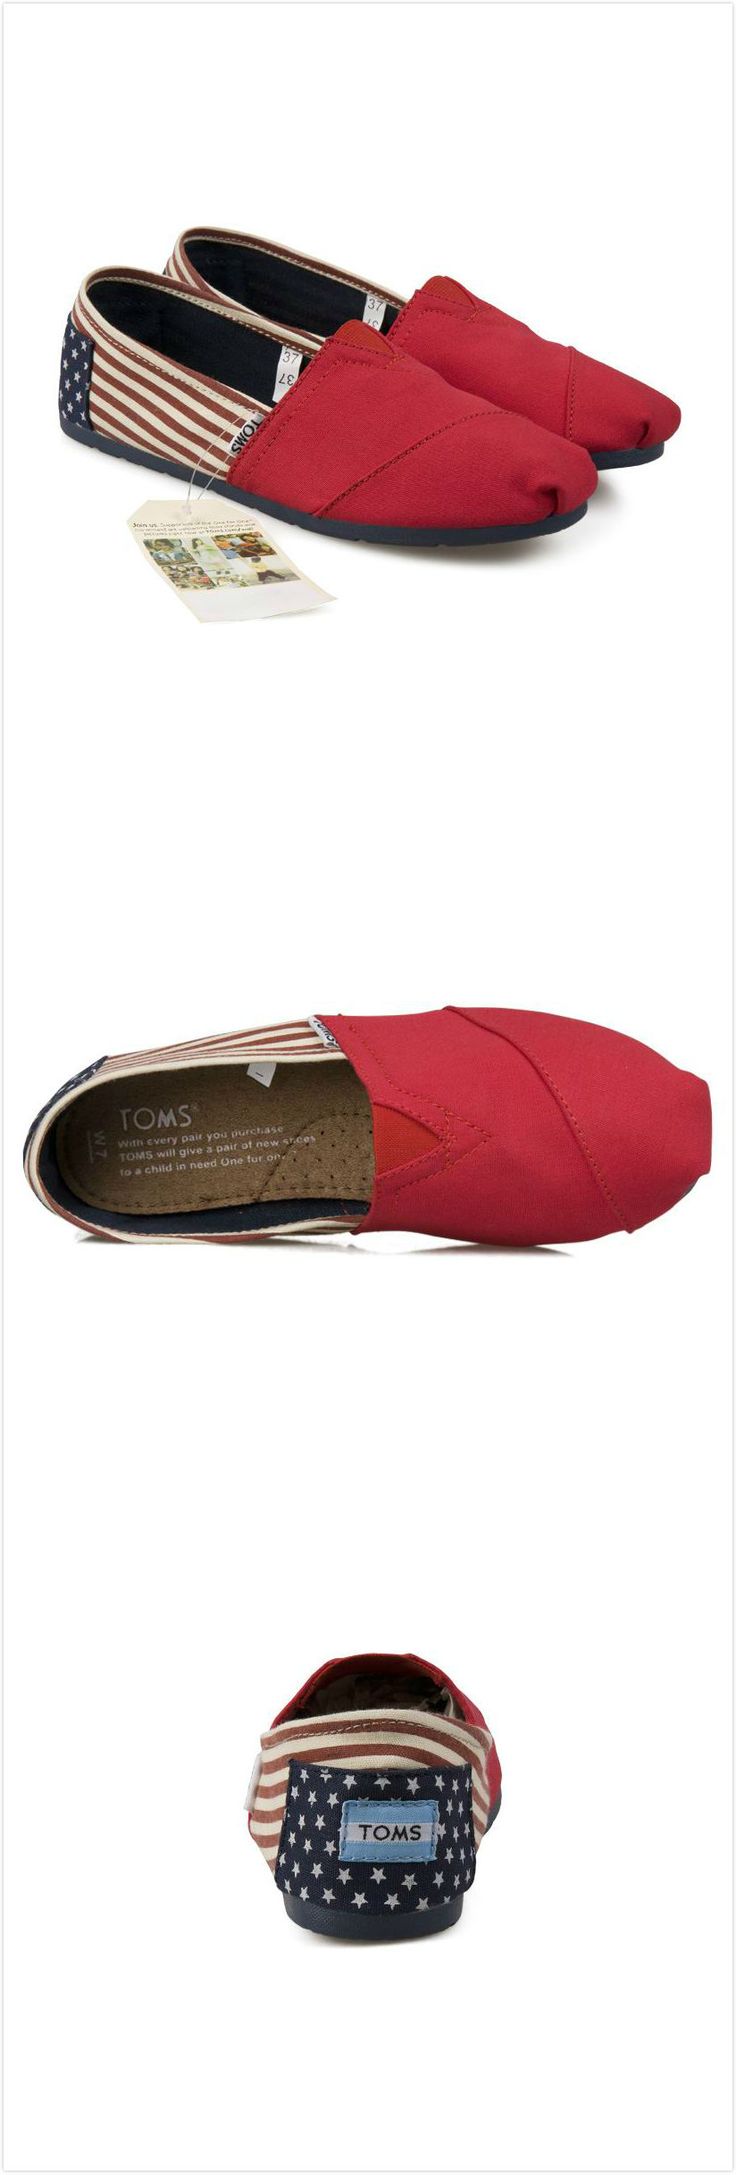 2013 Best selling Toms Shoes!  $16.89! #toms #shoes #fashion